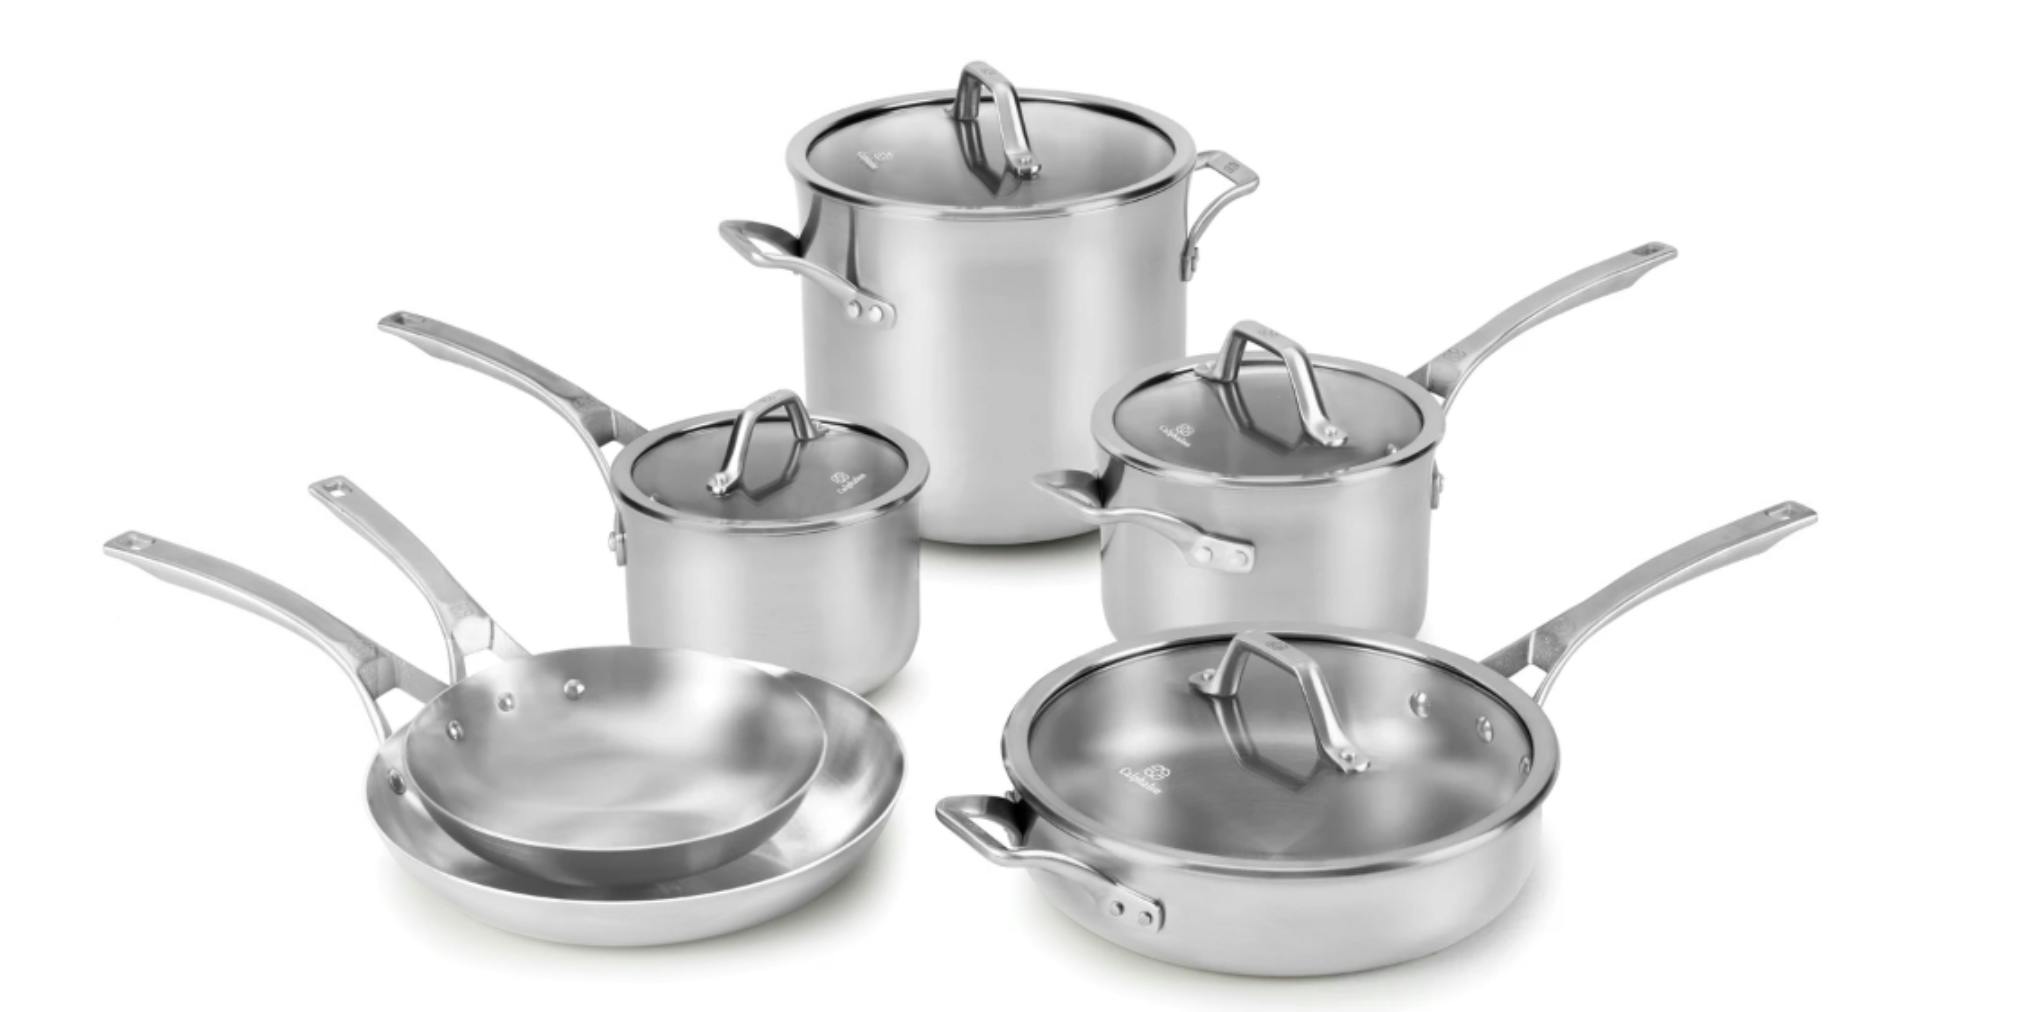 Buy Bergner Silver Stainless Steel 5Piece Cookware Set, Tope with